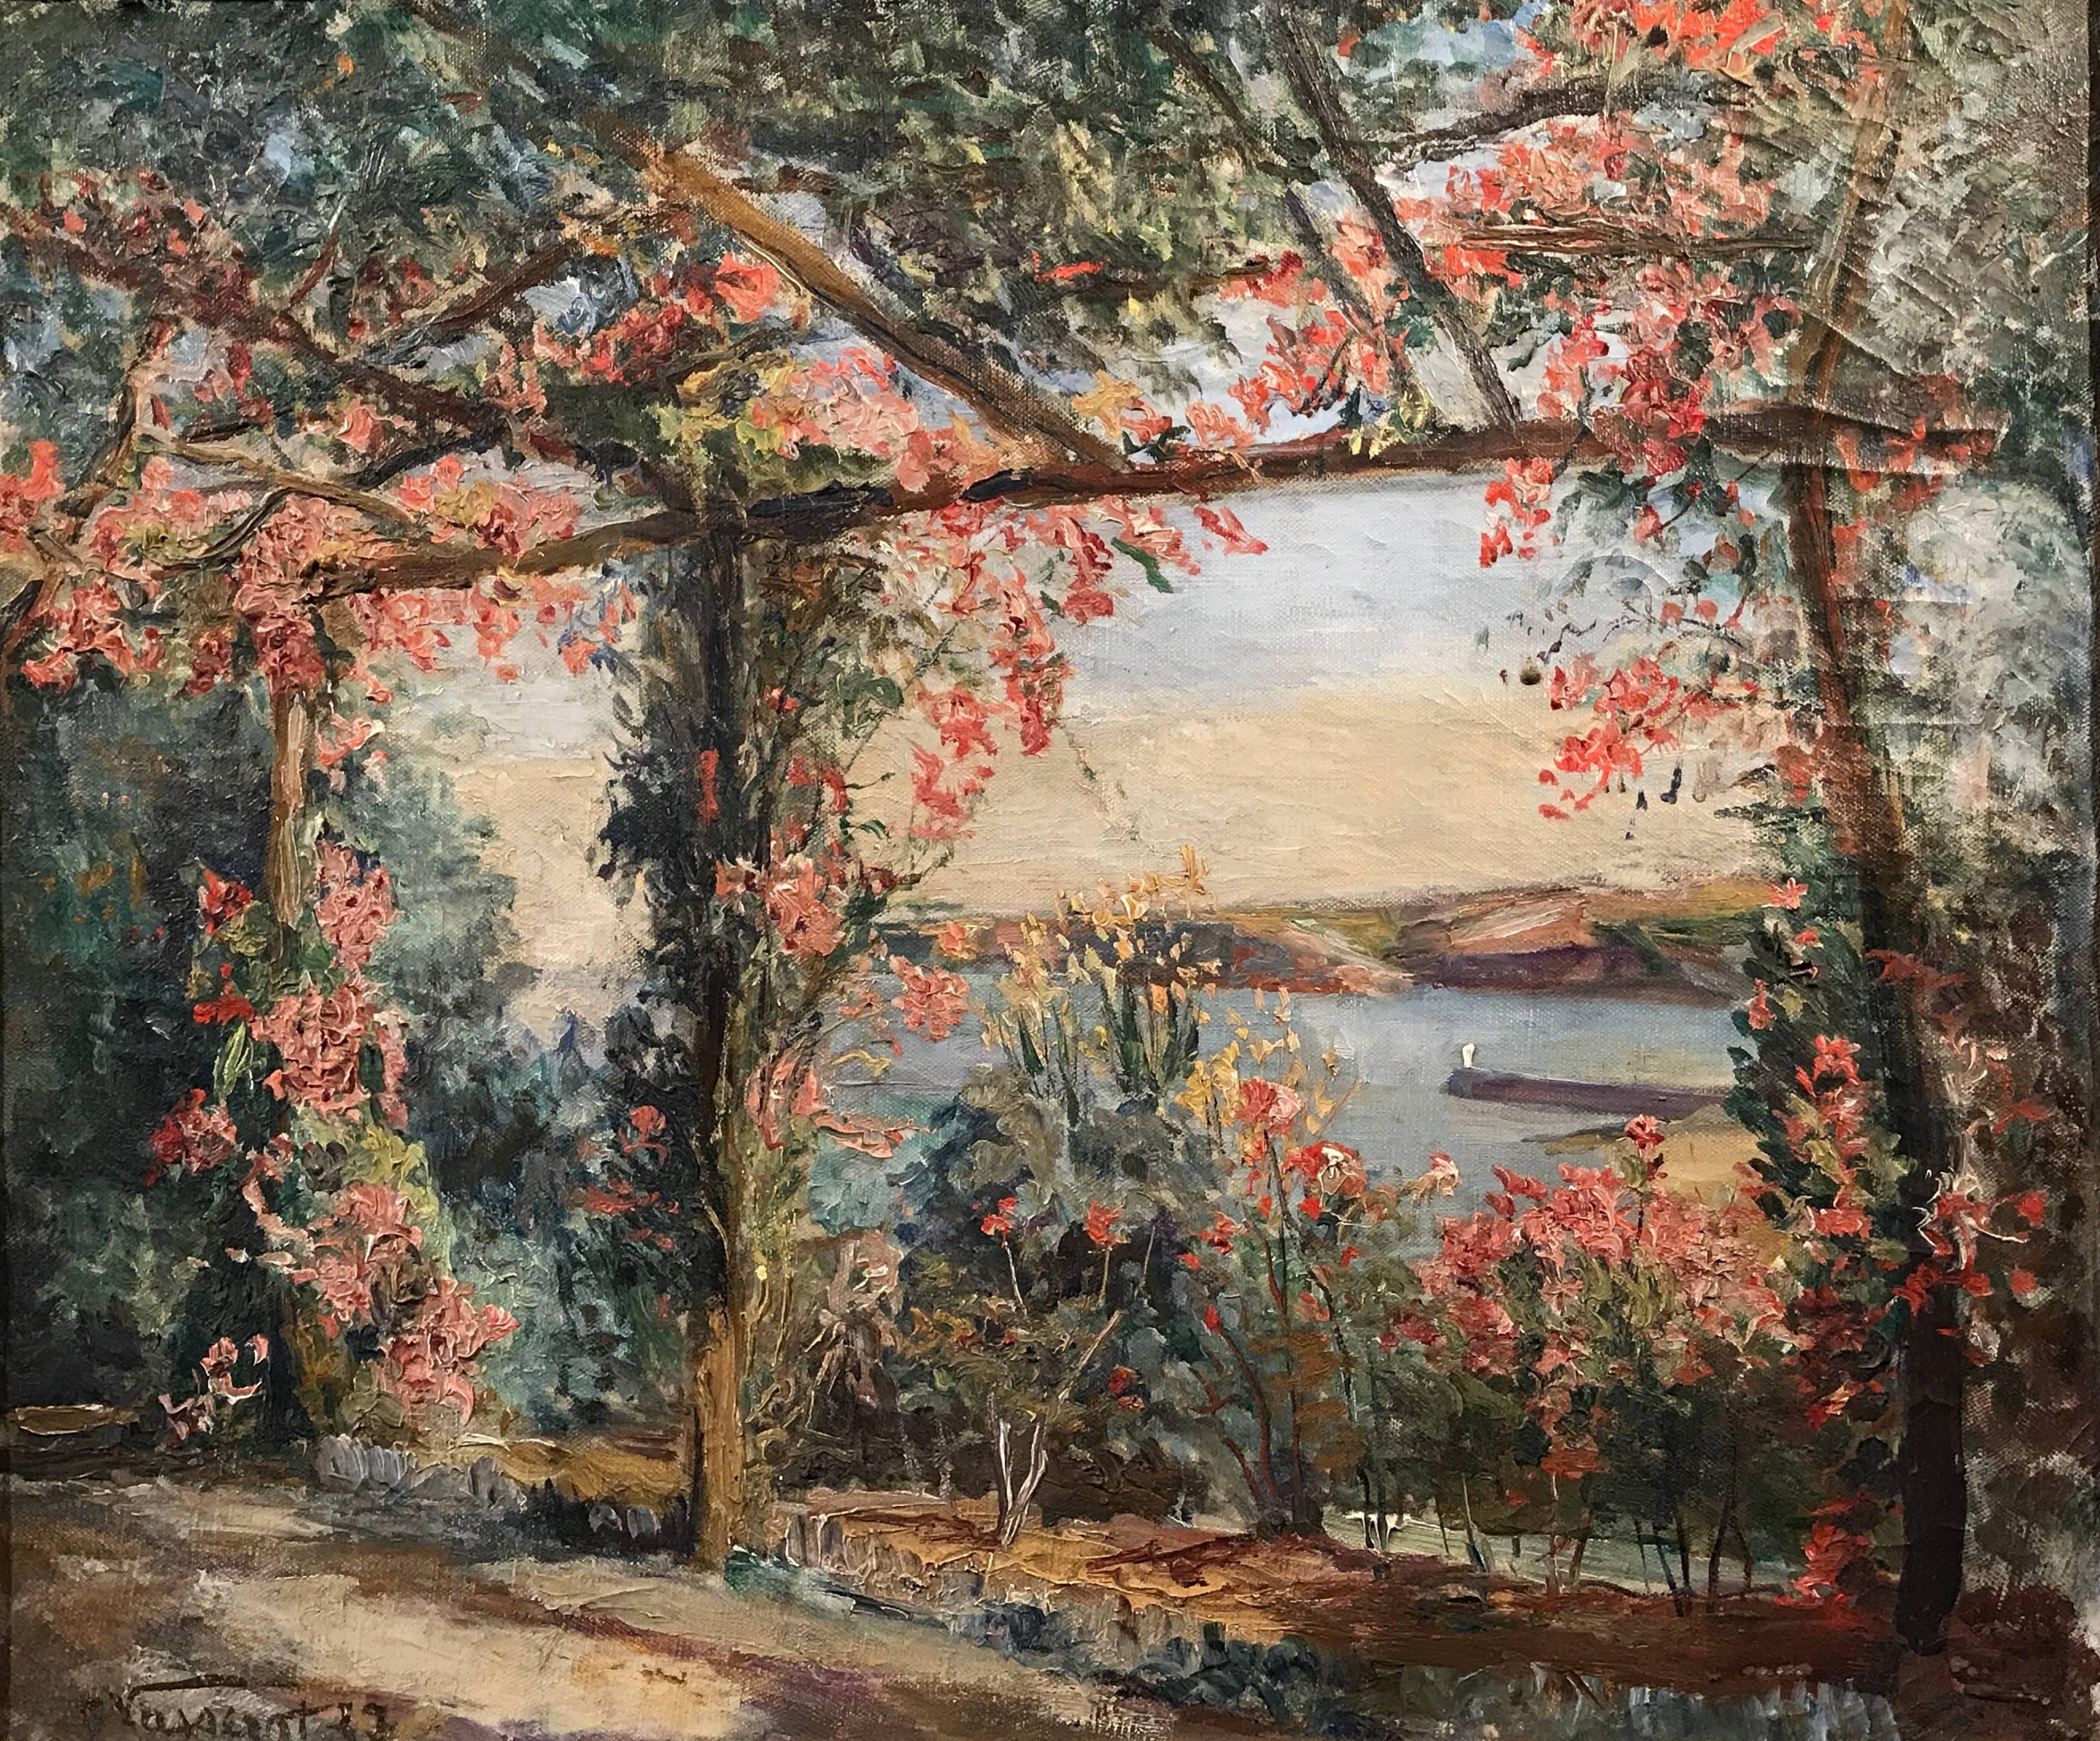 Pierre Vasserot Landscape Painting - The Terrace - 1930's French Impressionist Oil Painting